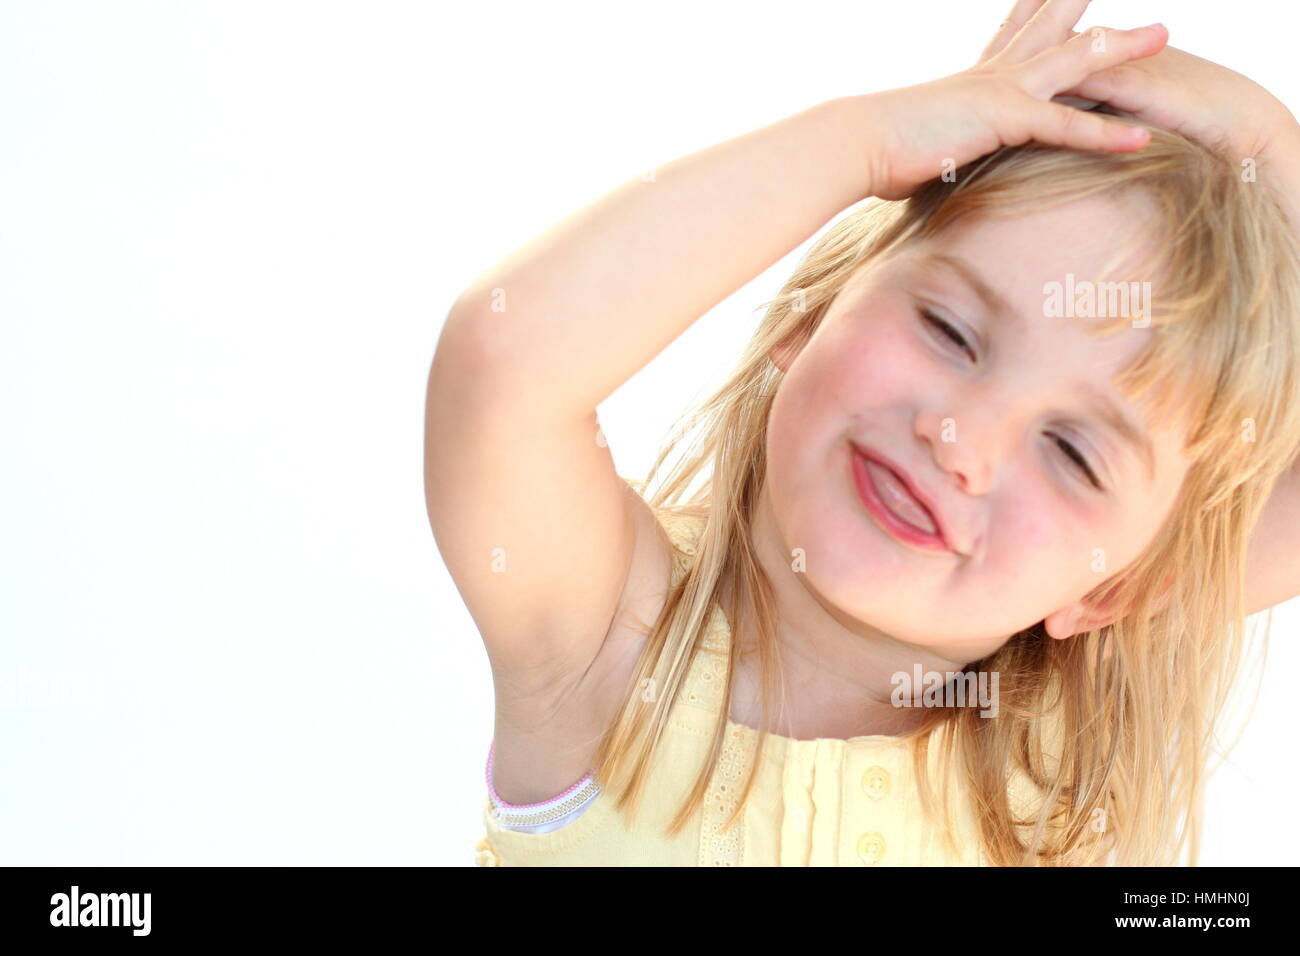 young girl smiling / child making a funny face sticking tongue out Stock Photo